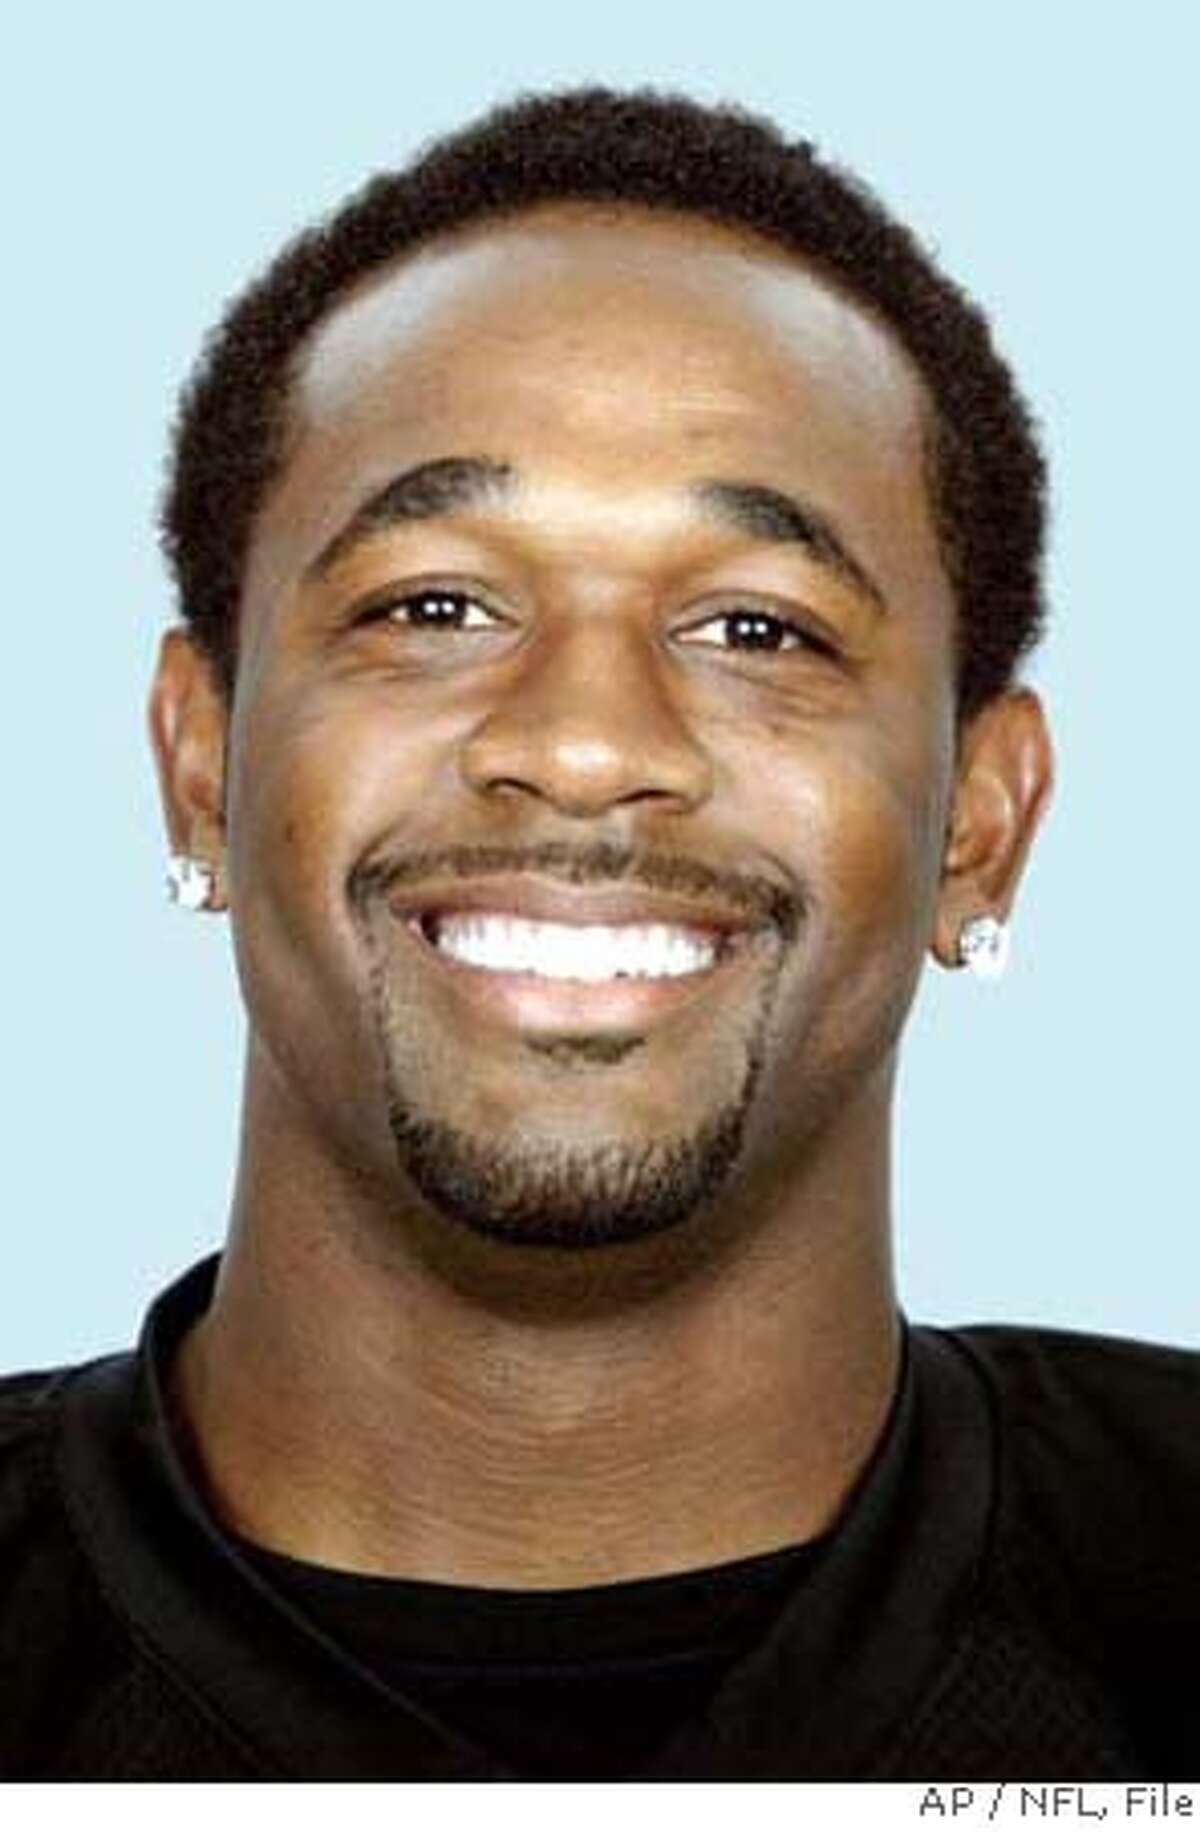 This 2006 handout from the NFL shows Jerry Porter. Porter returned to the Oakland Raiders on Wednesday Oct. 25, 2006 after the NFL Players Association dropped its appeal of the receiver's four-game suspension and the team reduced the punishment to two games. (AP Photo/HO, NFL) 2006 HANDOUT FROM THE NFL. MO.